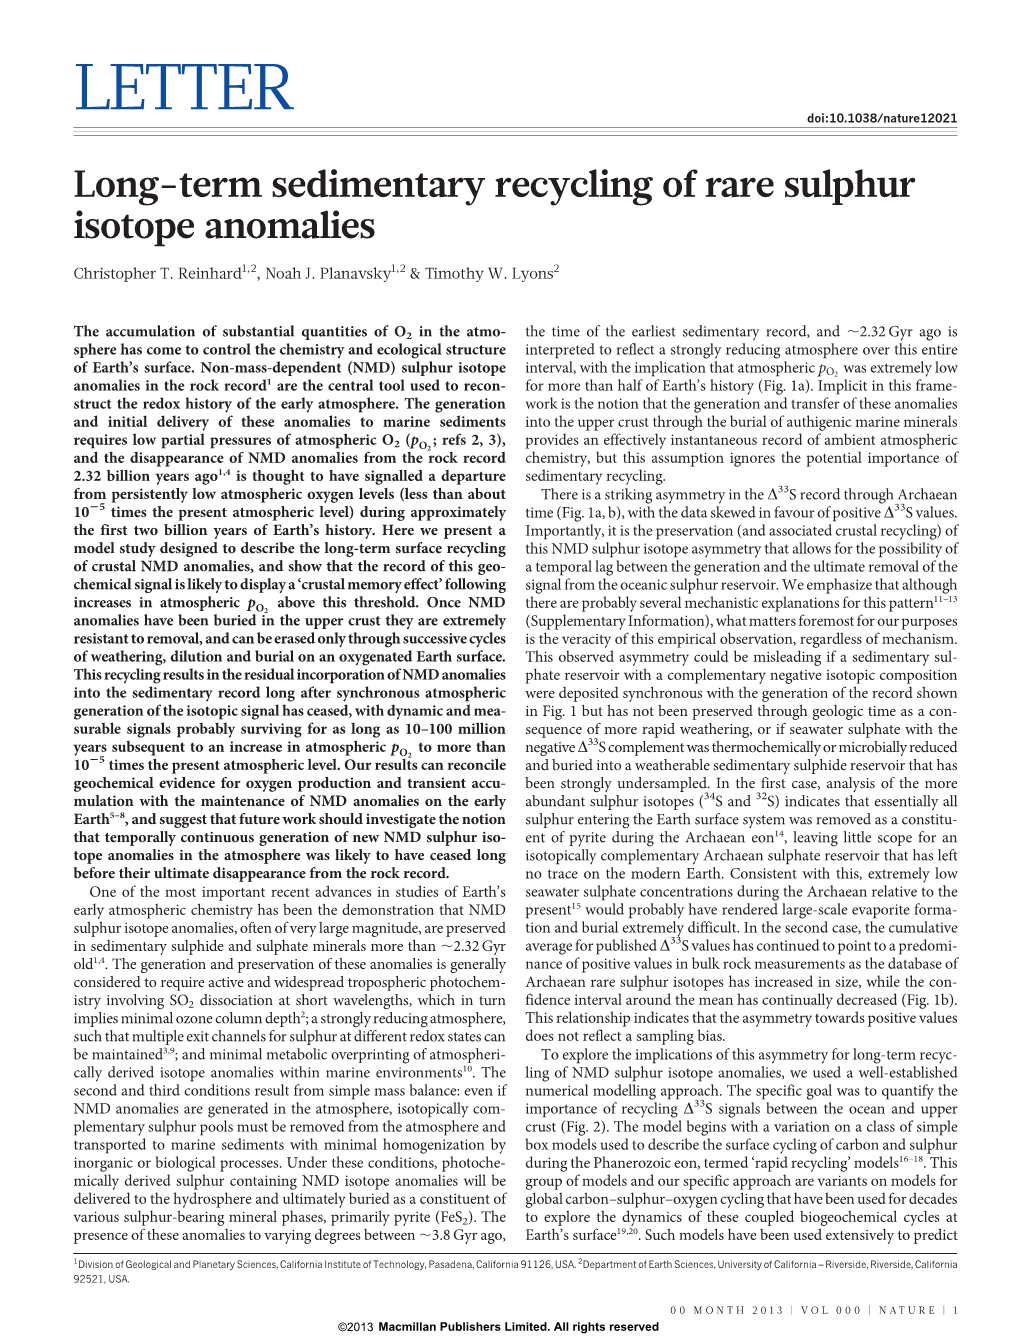 Long-Term Sedimentary Recycling of Rare Sulphur Isotope Anomalies